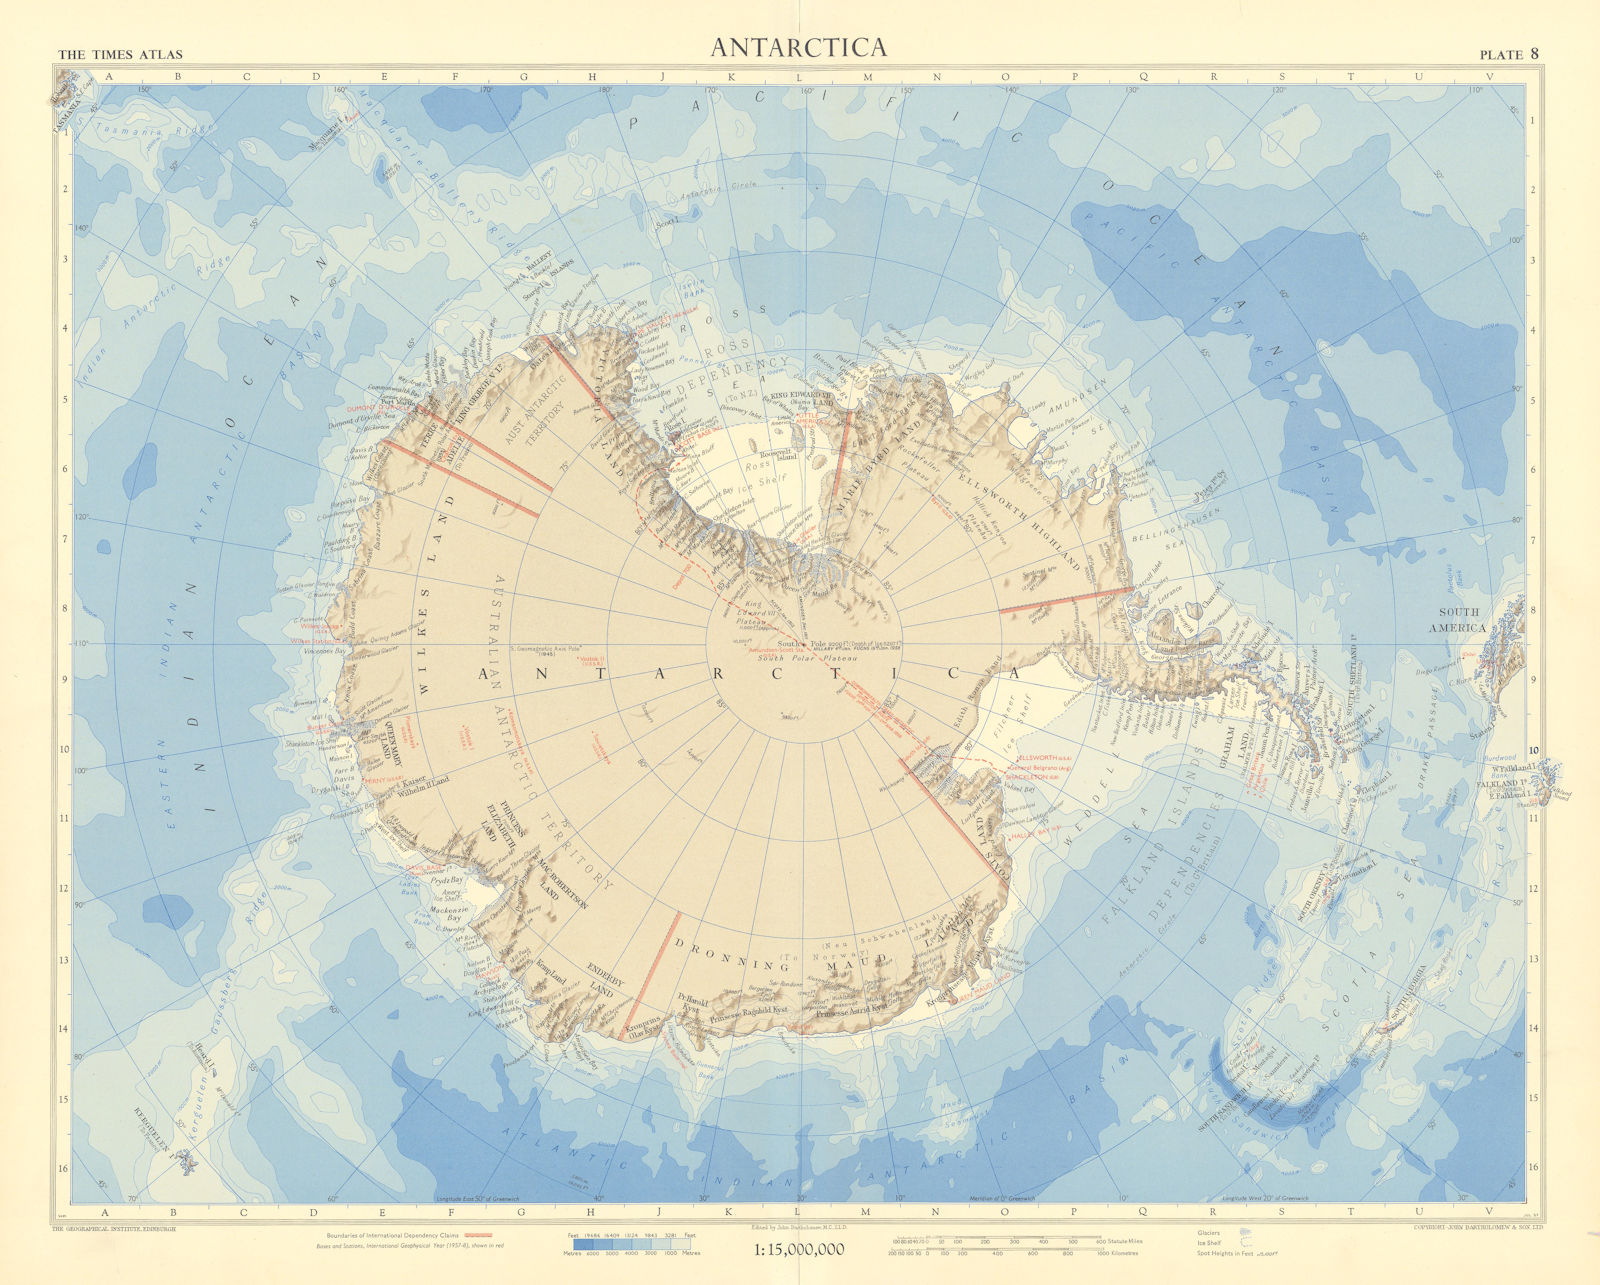 Associate Product Antarctica. Research stations & CTAE 1957-58 route. South Pole. TIMES 1958 map